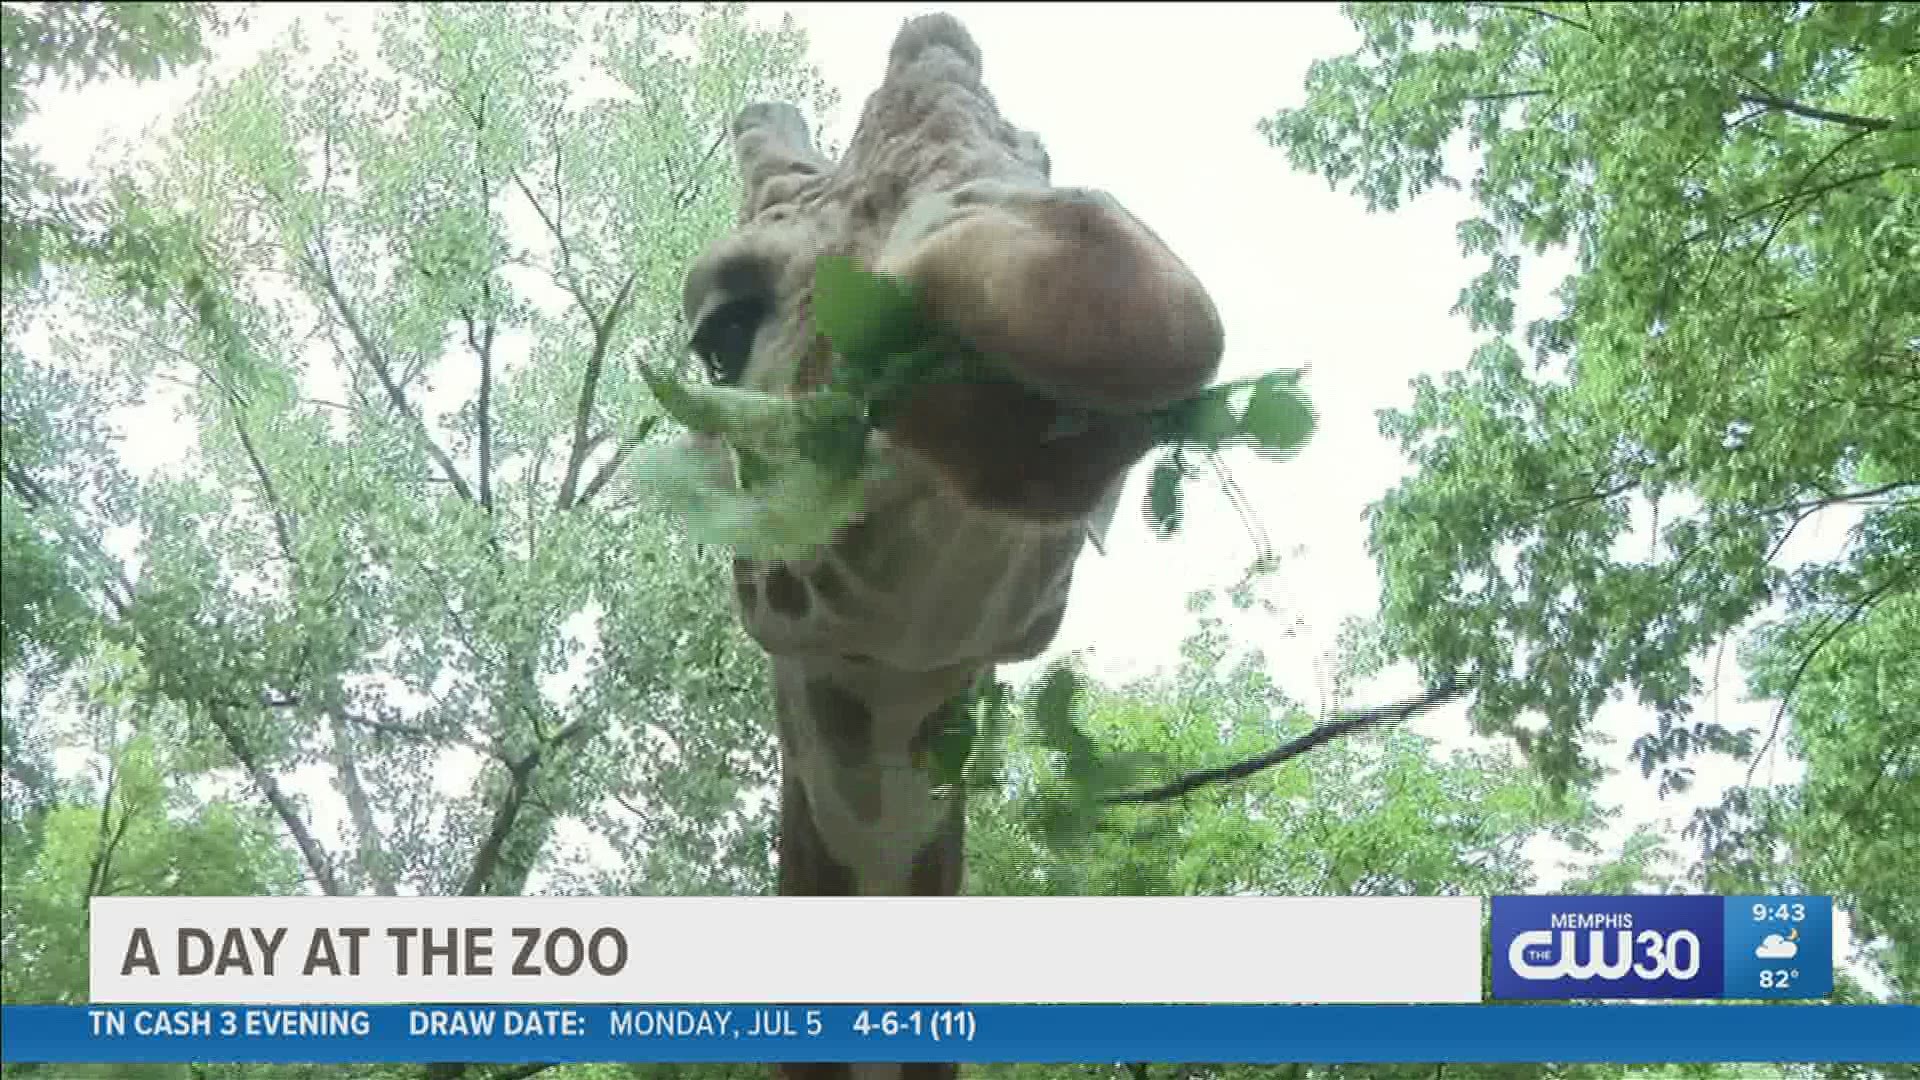 Local 24 News photojournalist Patrick Niedzwiedz went to the Memphis Zoo to see how the animals --and their human visitors-- spent this seasonably hot summer day.